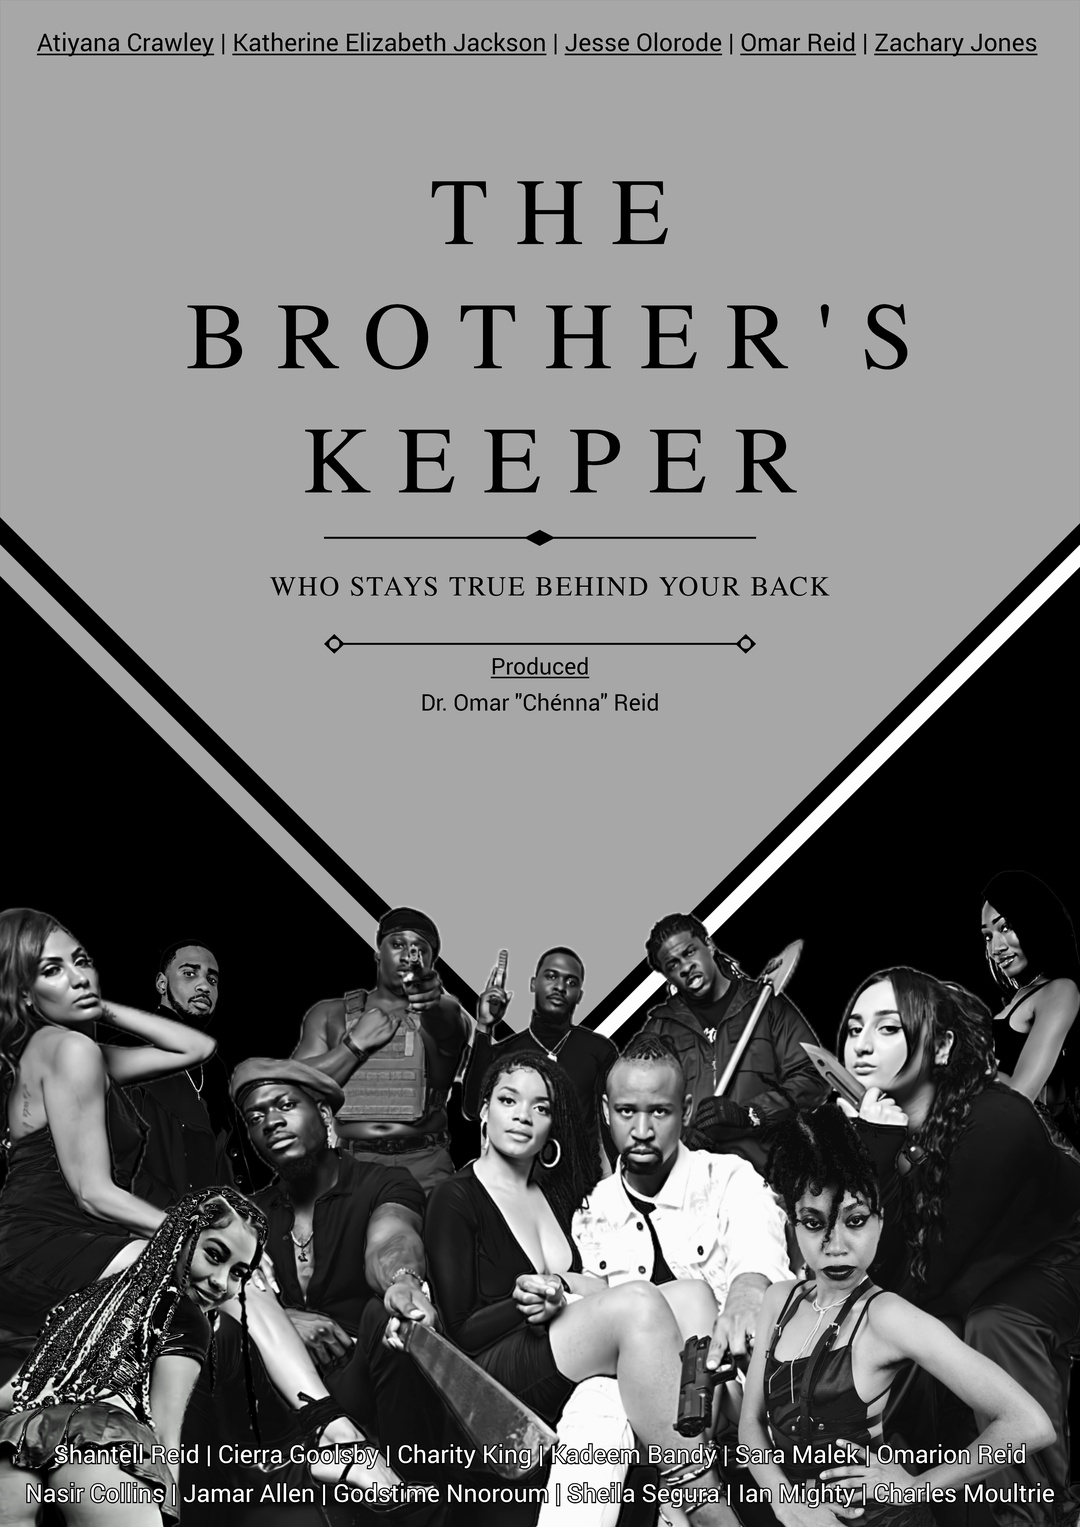 The Brother's Keeper